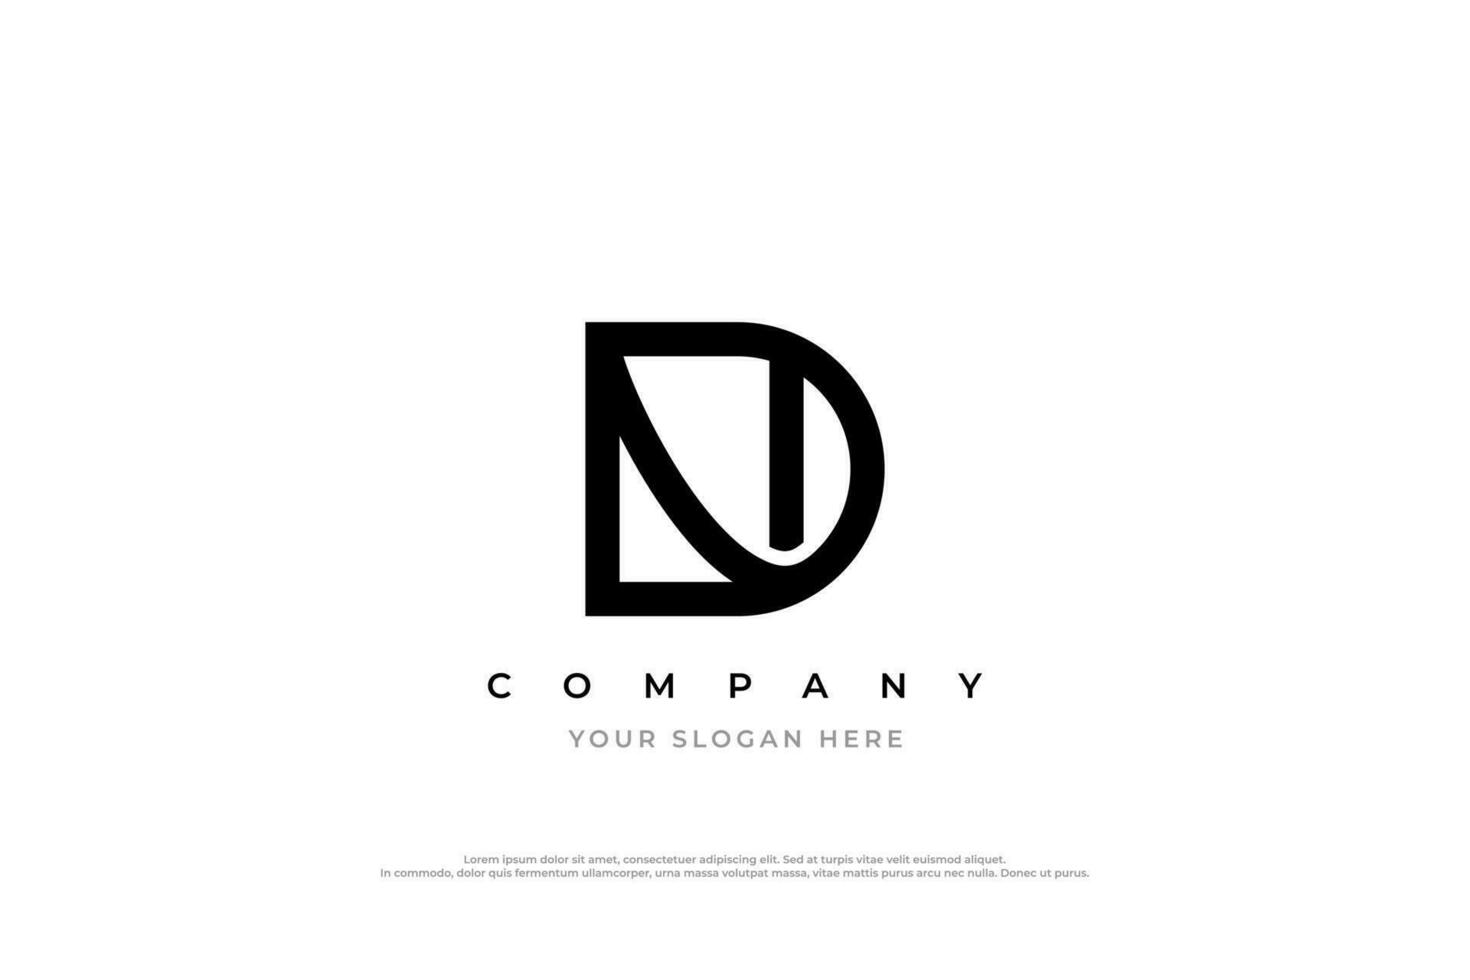 Initial Letter ND or DN Logo Design Vector